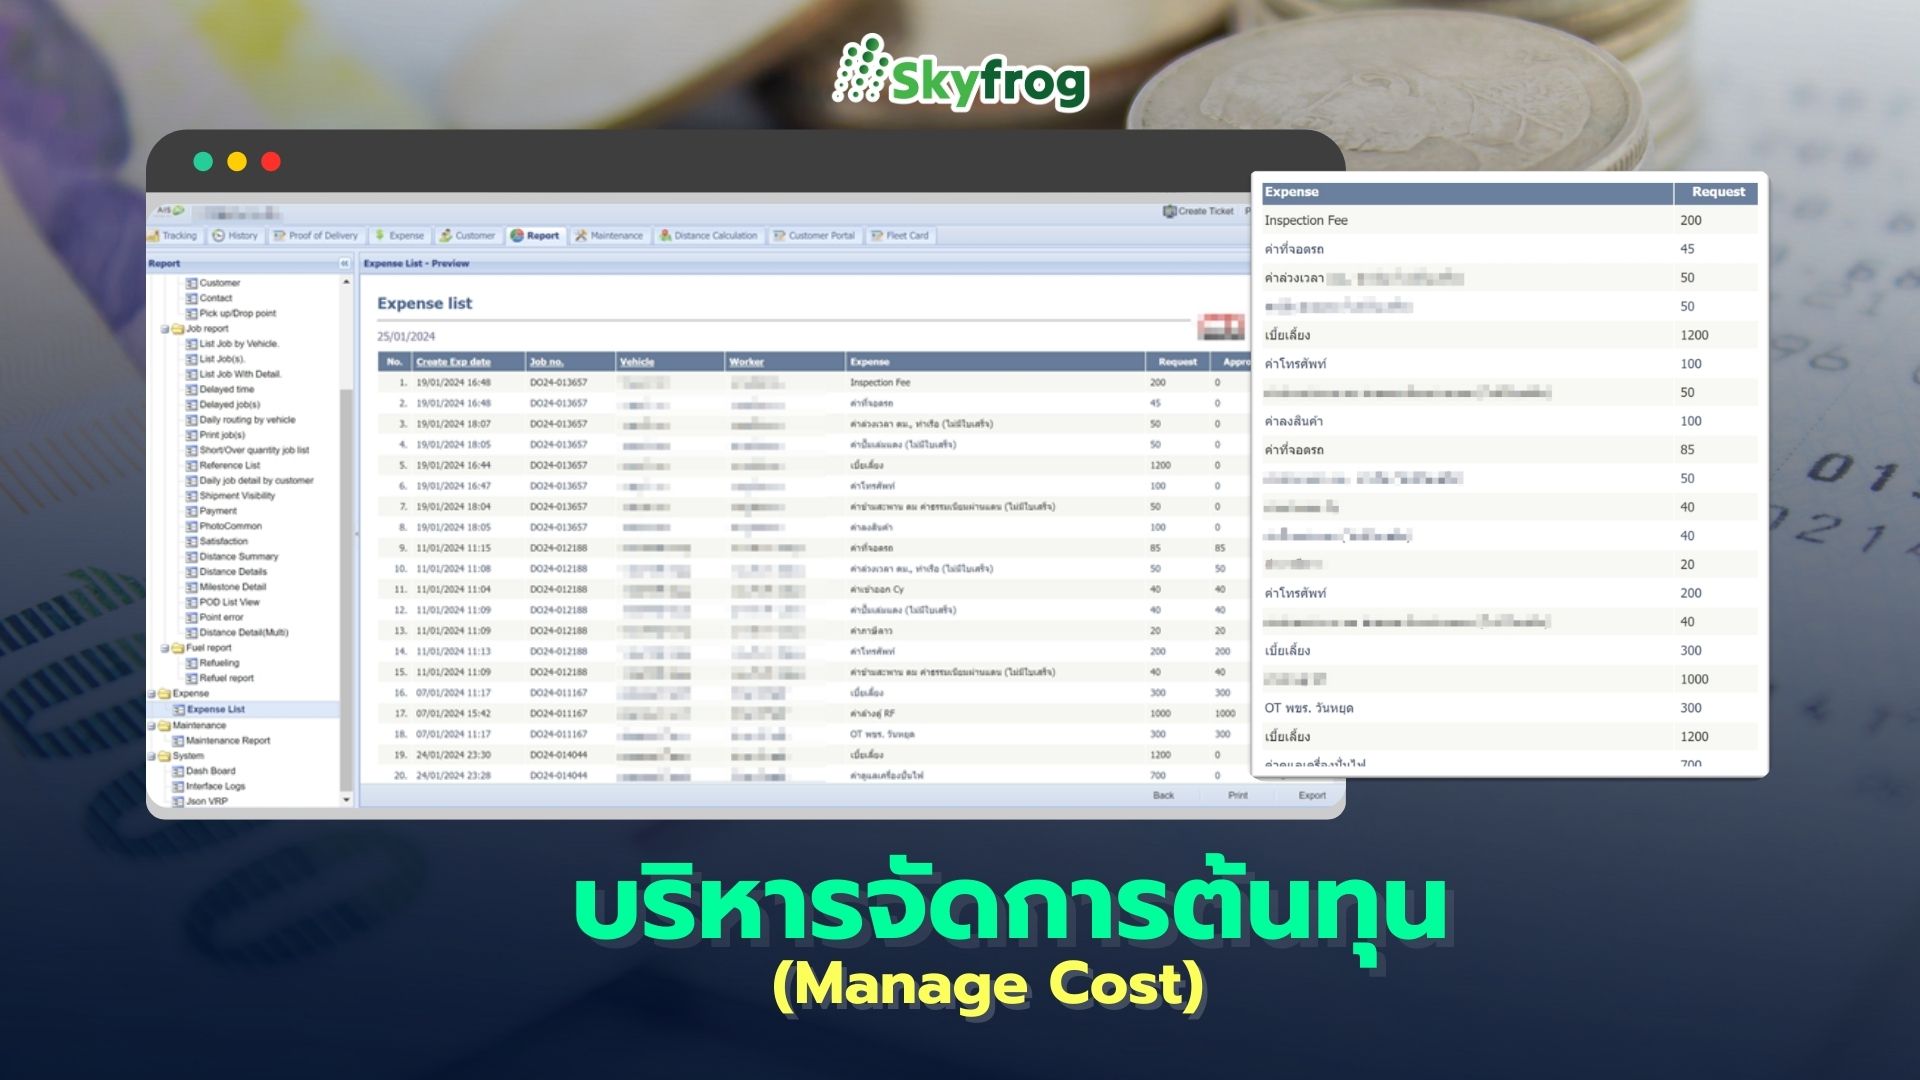 SKYFROG TMS Container Manage Cost